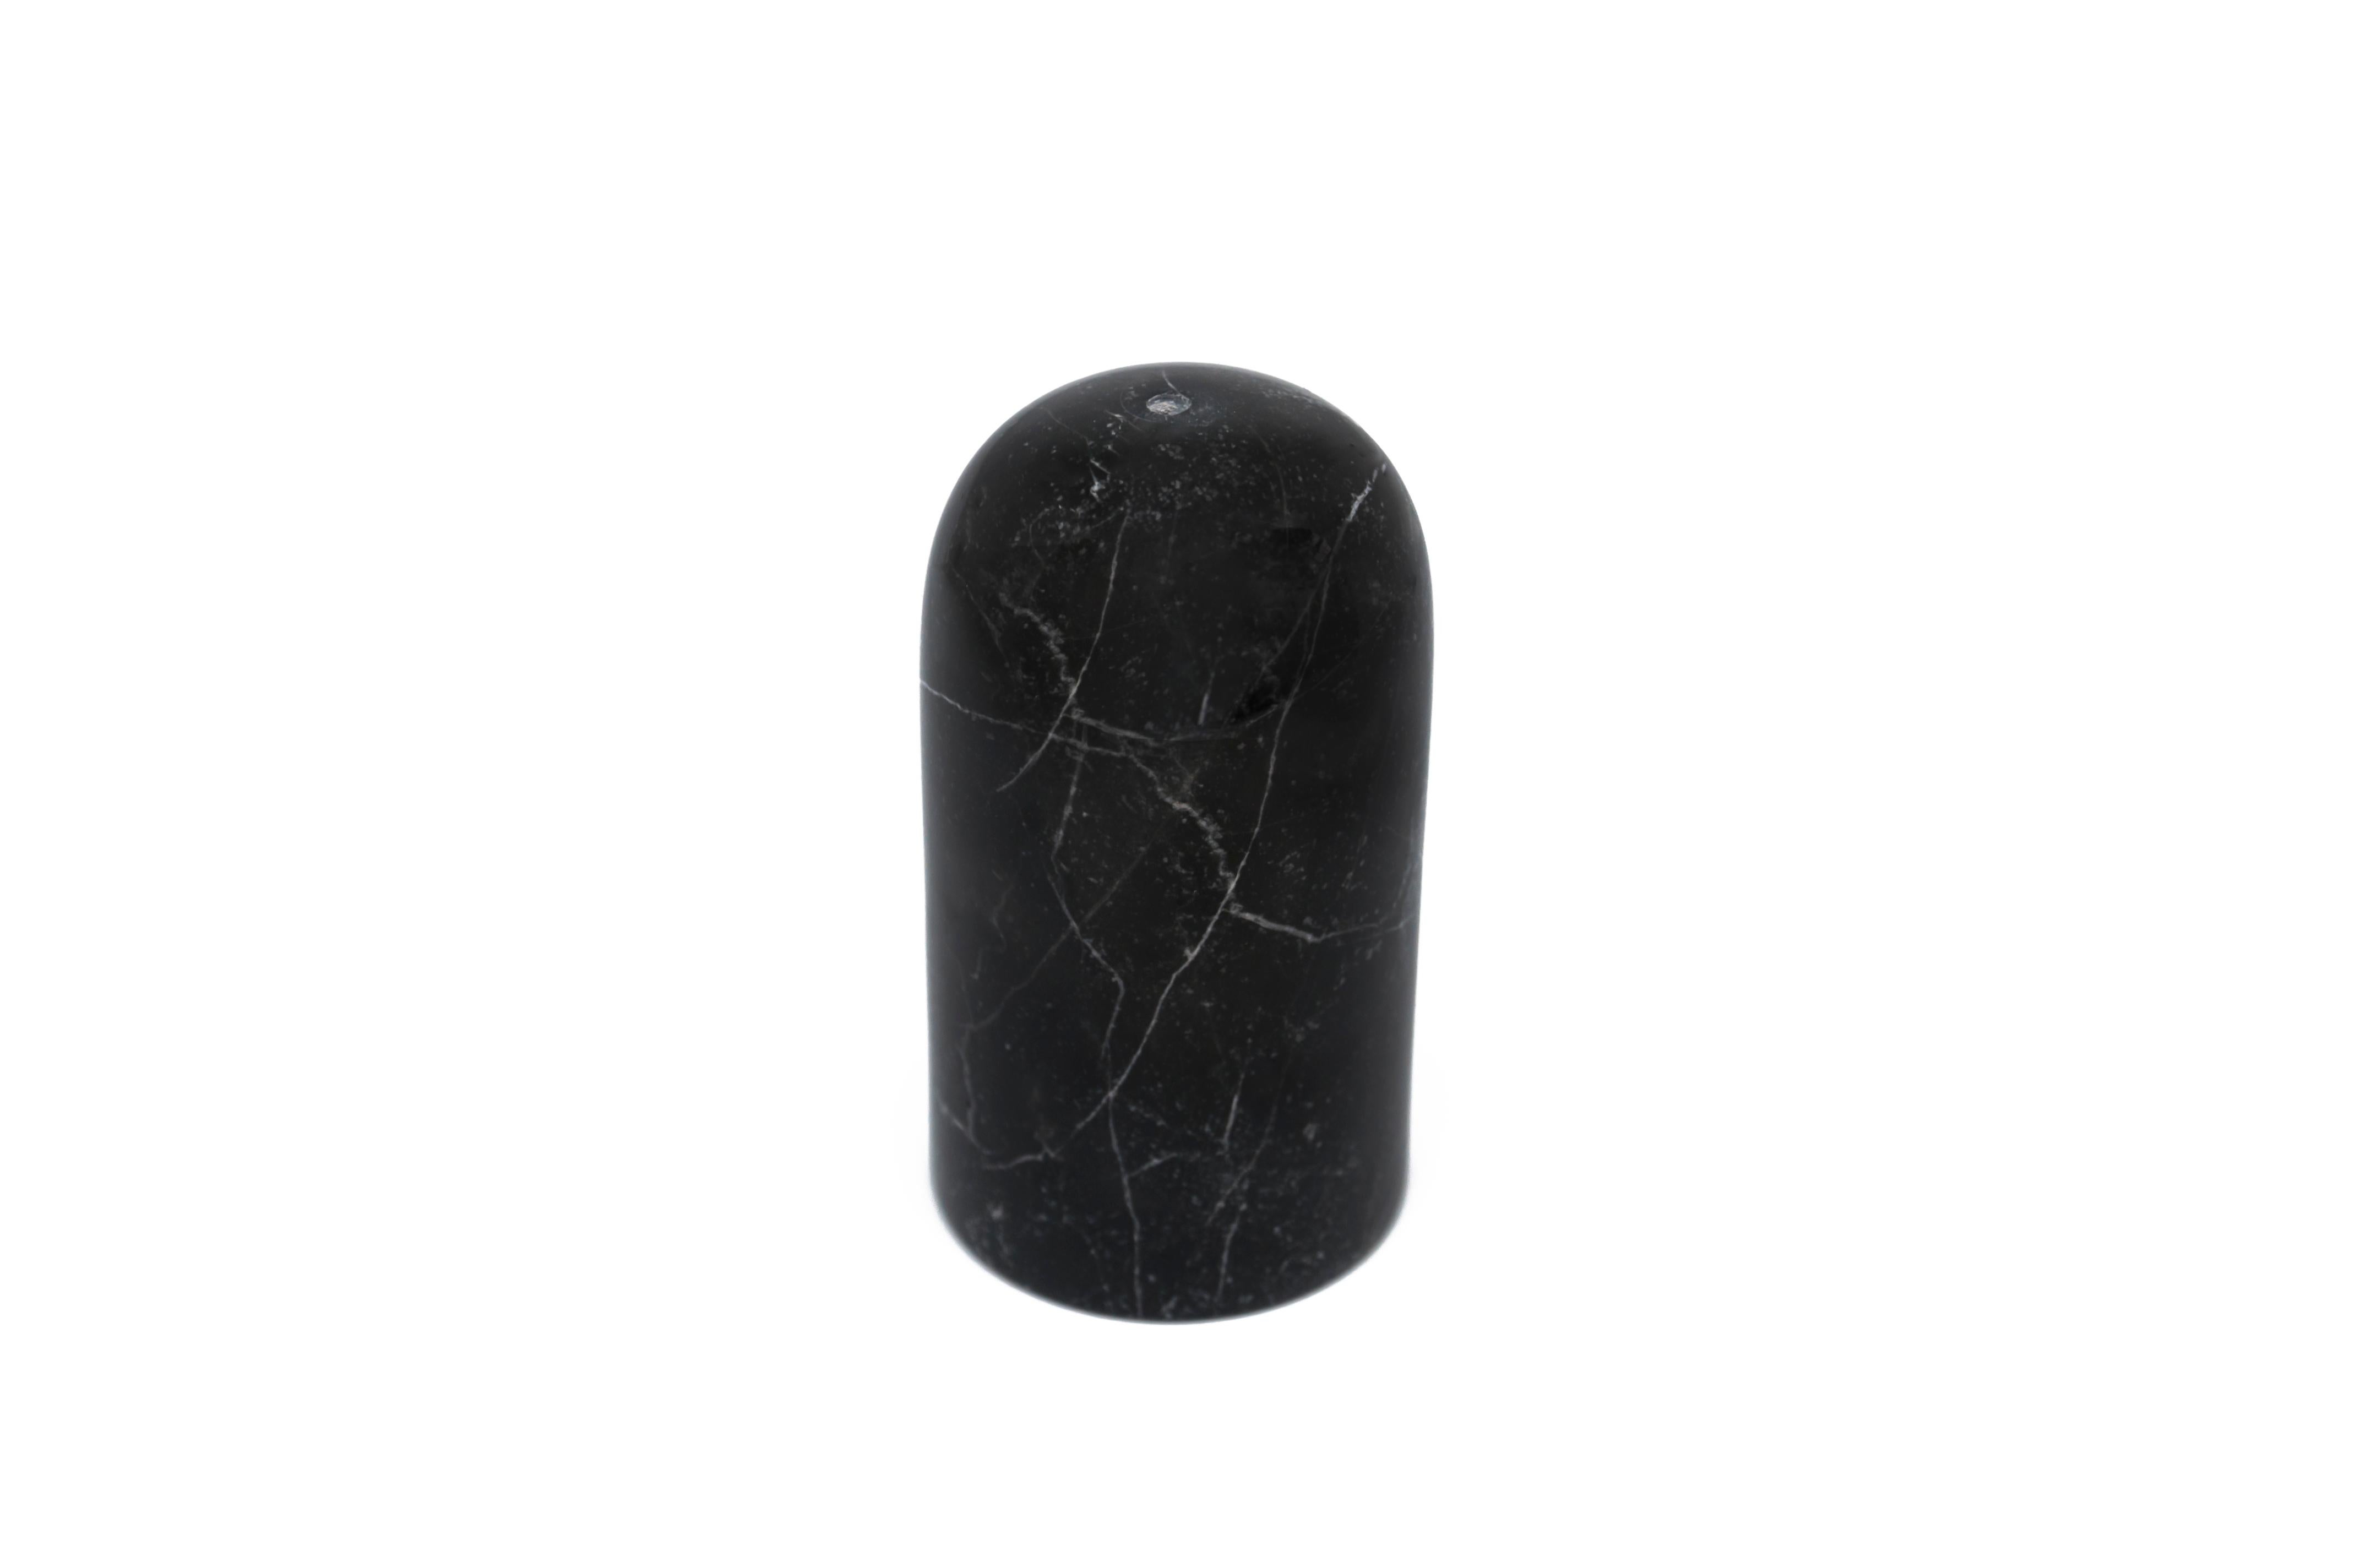 Black Marquina and white Carrara marble rounded shape salt and pepper set, salt white and pepper black.
Each piece is in a way unique (since each marble block is different in veins and shades) and handcrafted in Italy. Slight variations in shape,